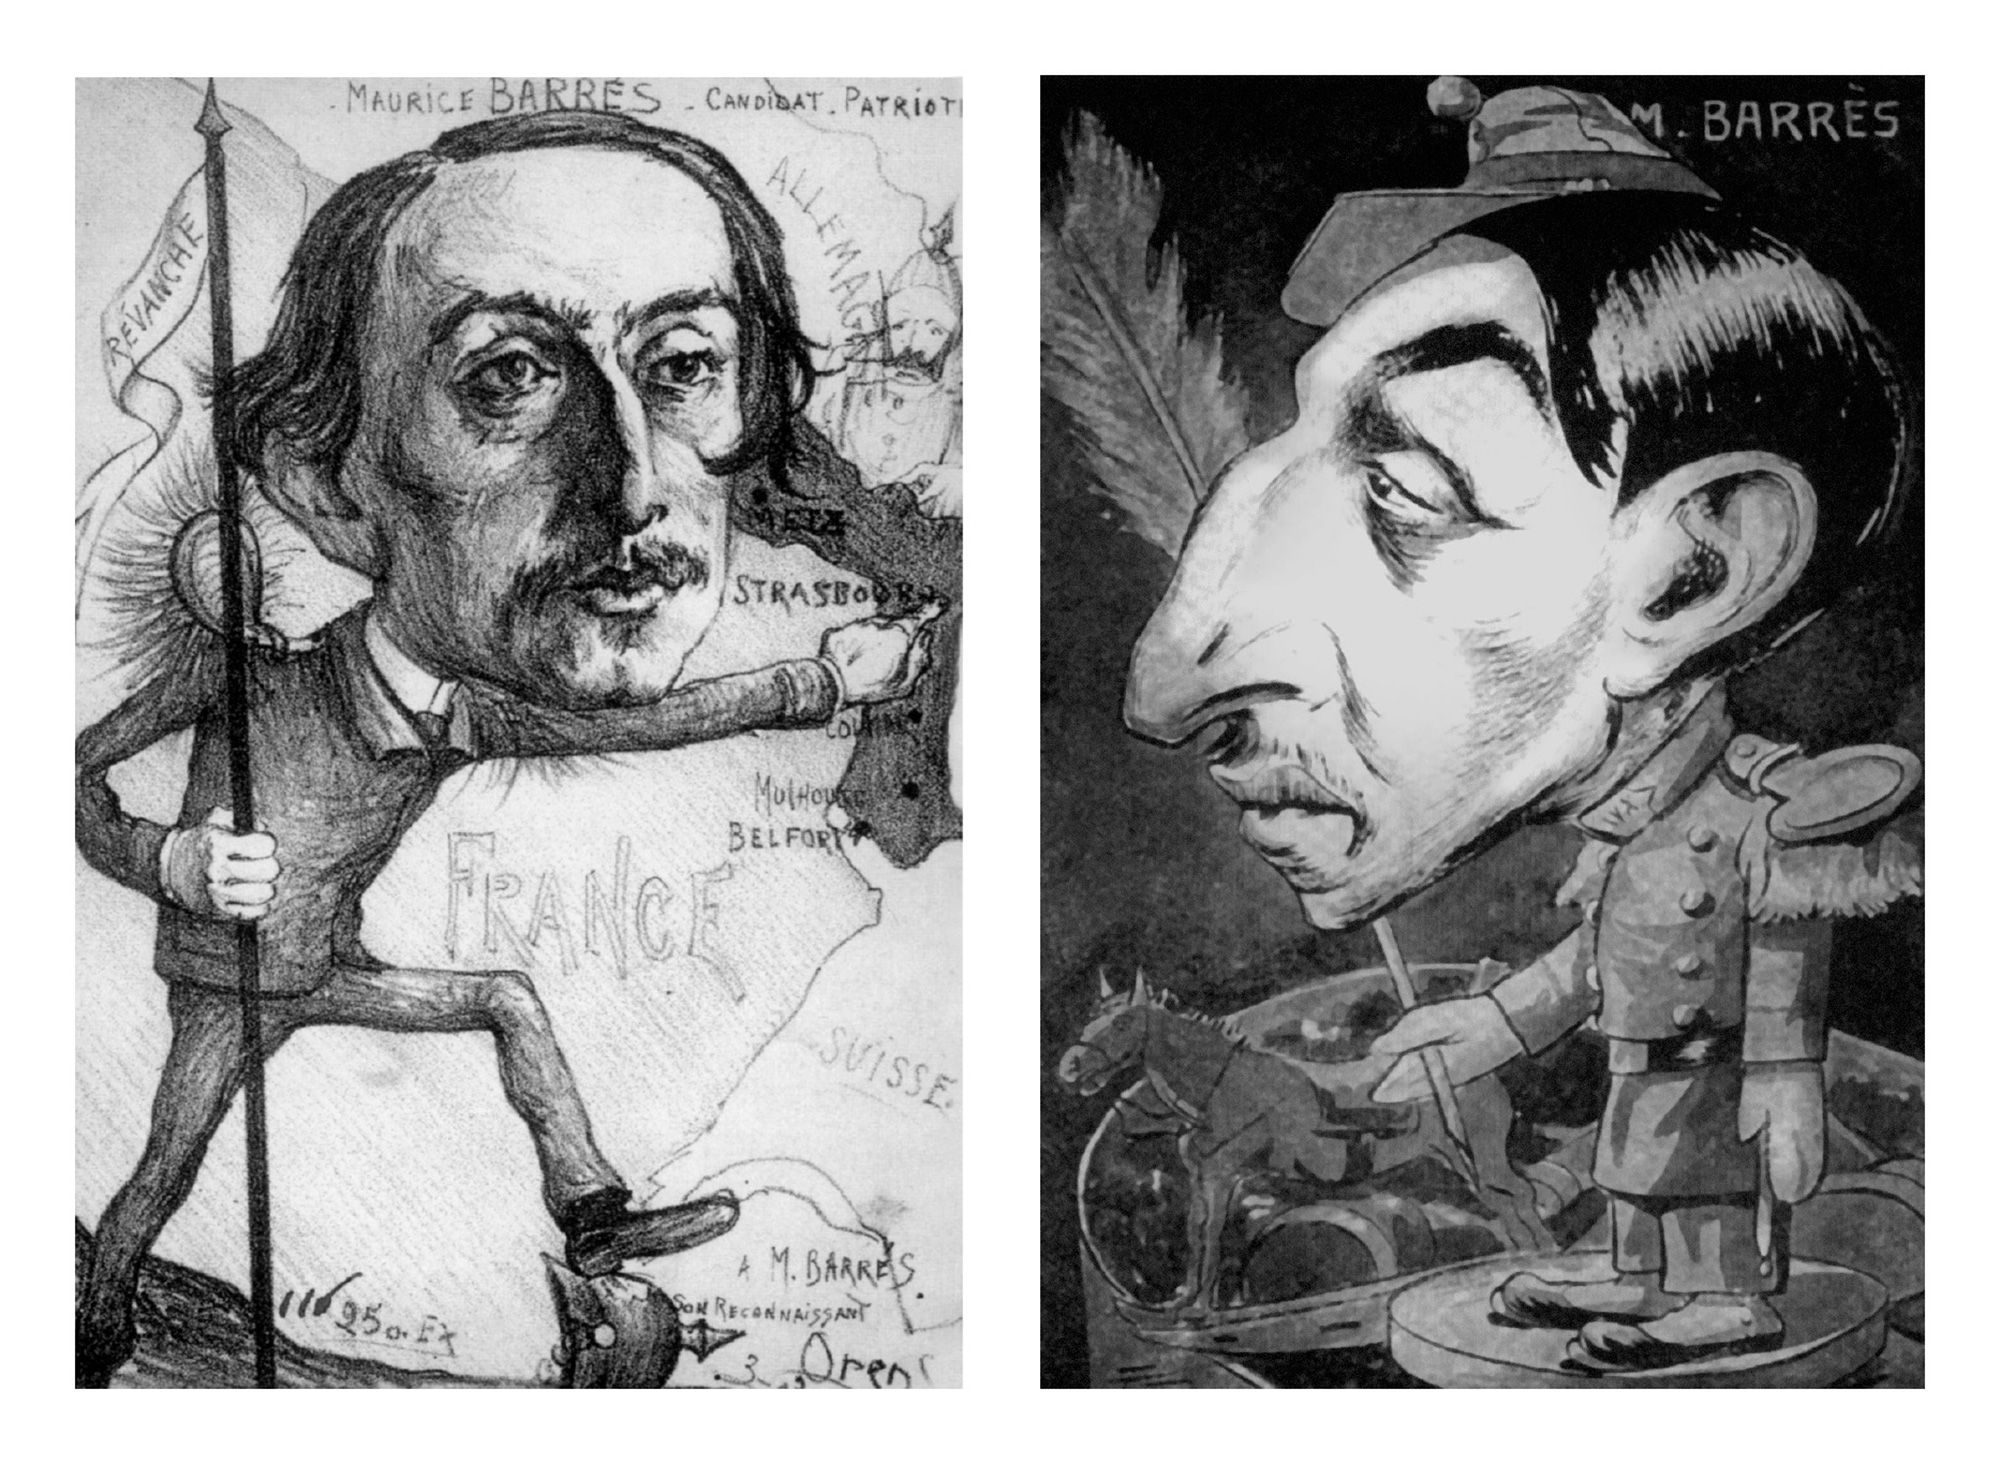 Two caricatures of Maurice Barrès, a writer, patriot, and candidate.